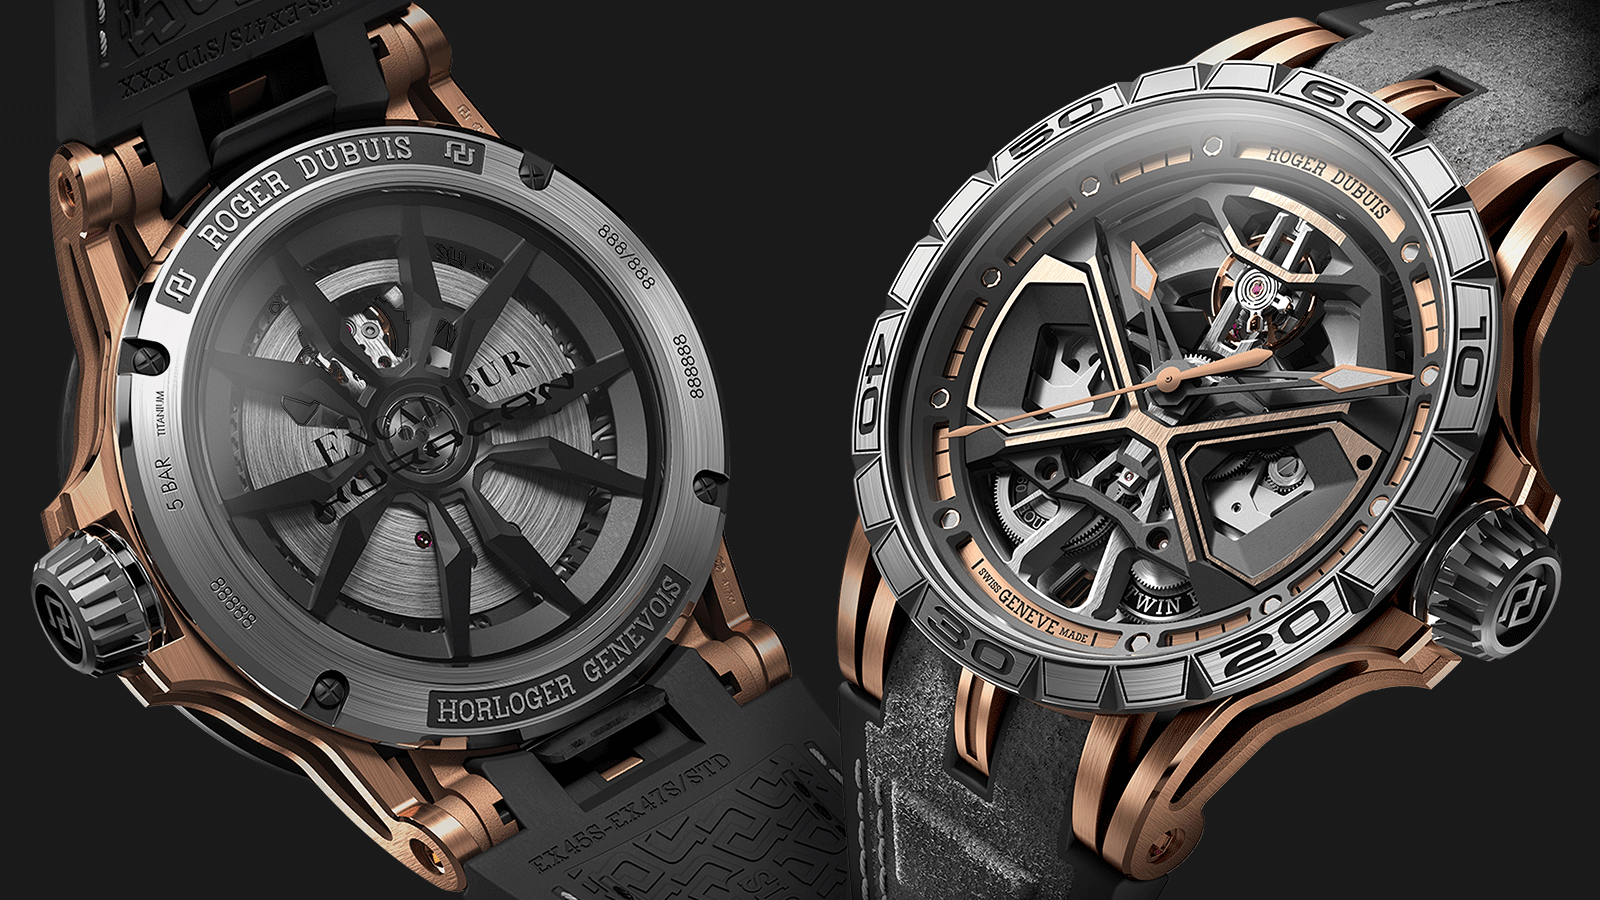 Lamborghini, the super car manufacturer from Italy, and ROGER DUBUIS HYPERWATCH™ manufacturer from Geneva, teamed up and unleashed their creativity to release audacious timepieces born to race.